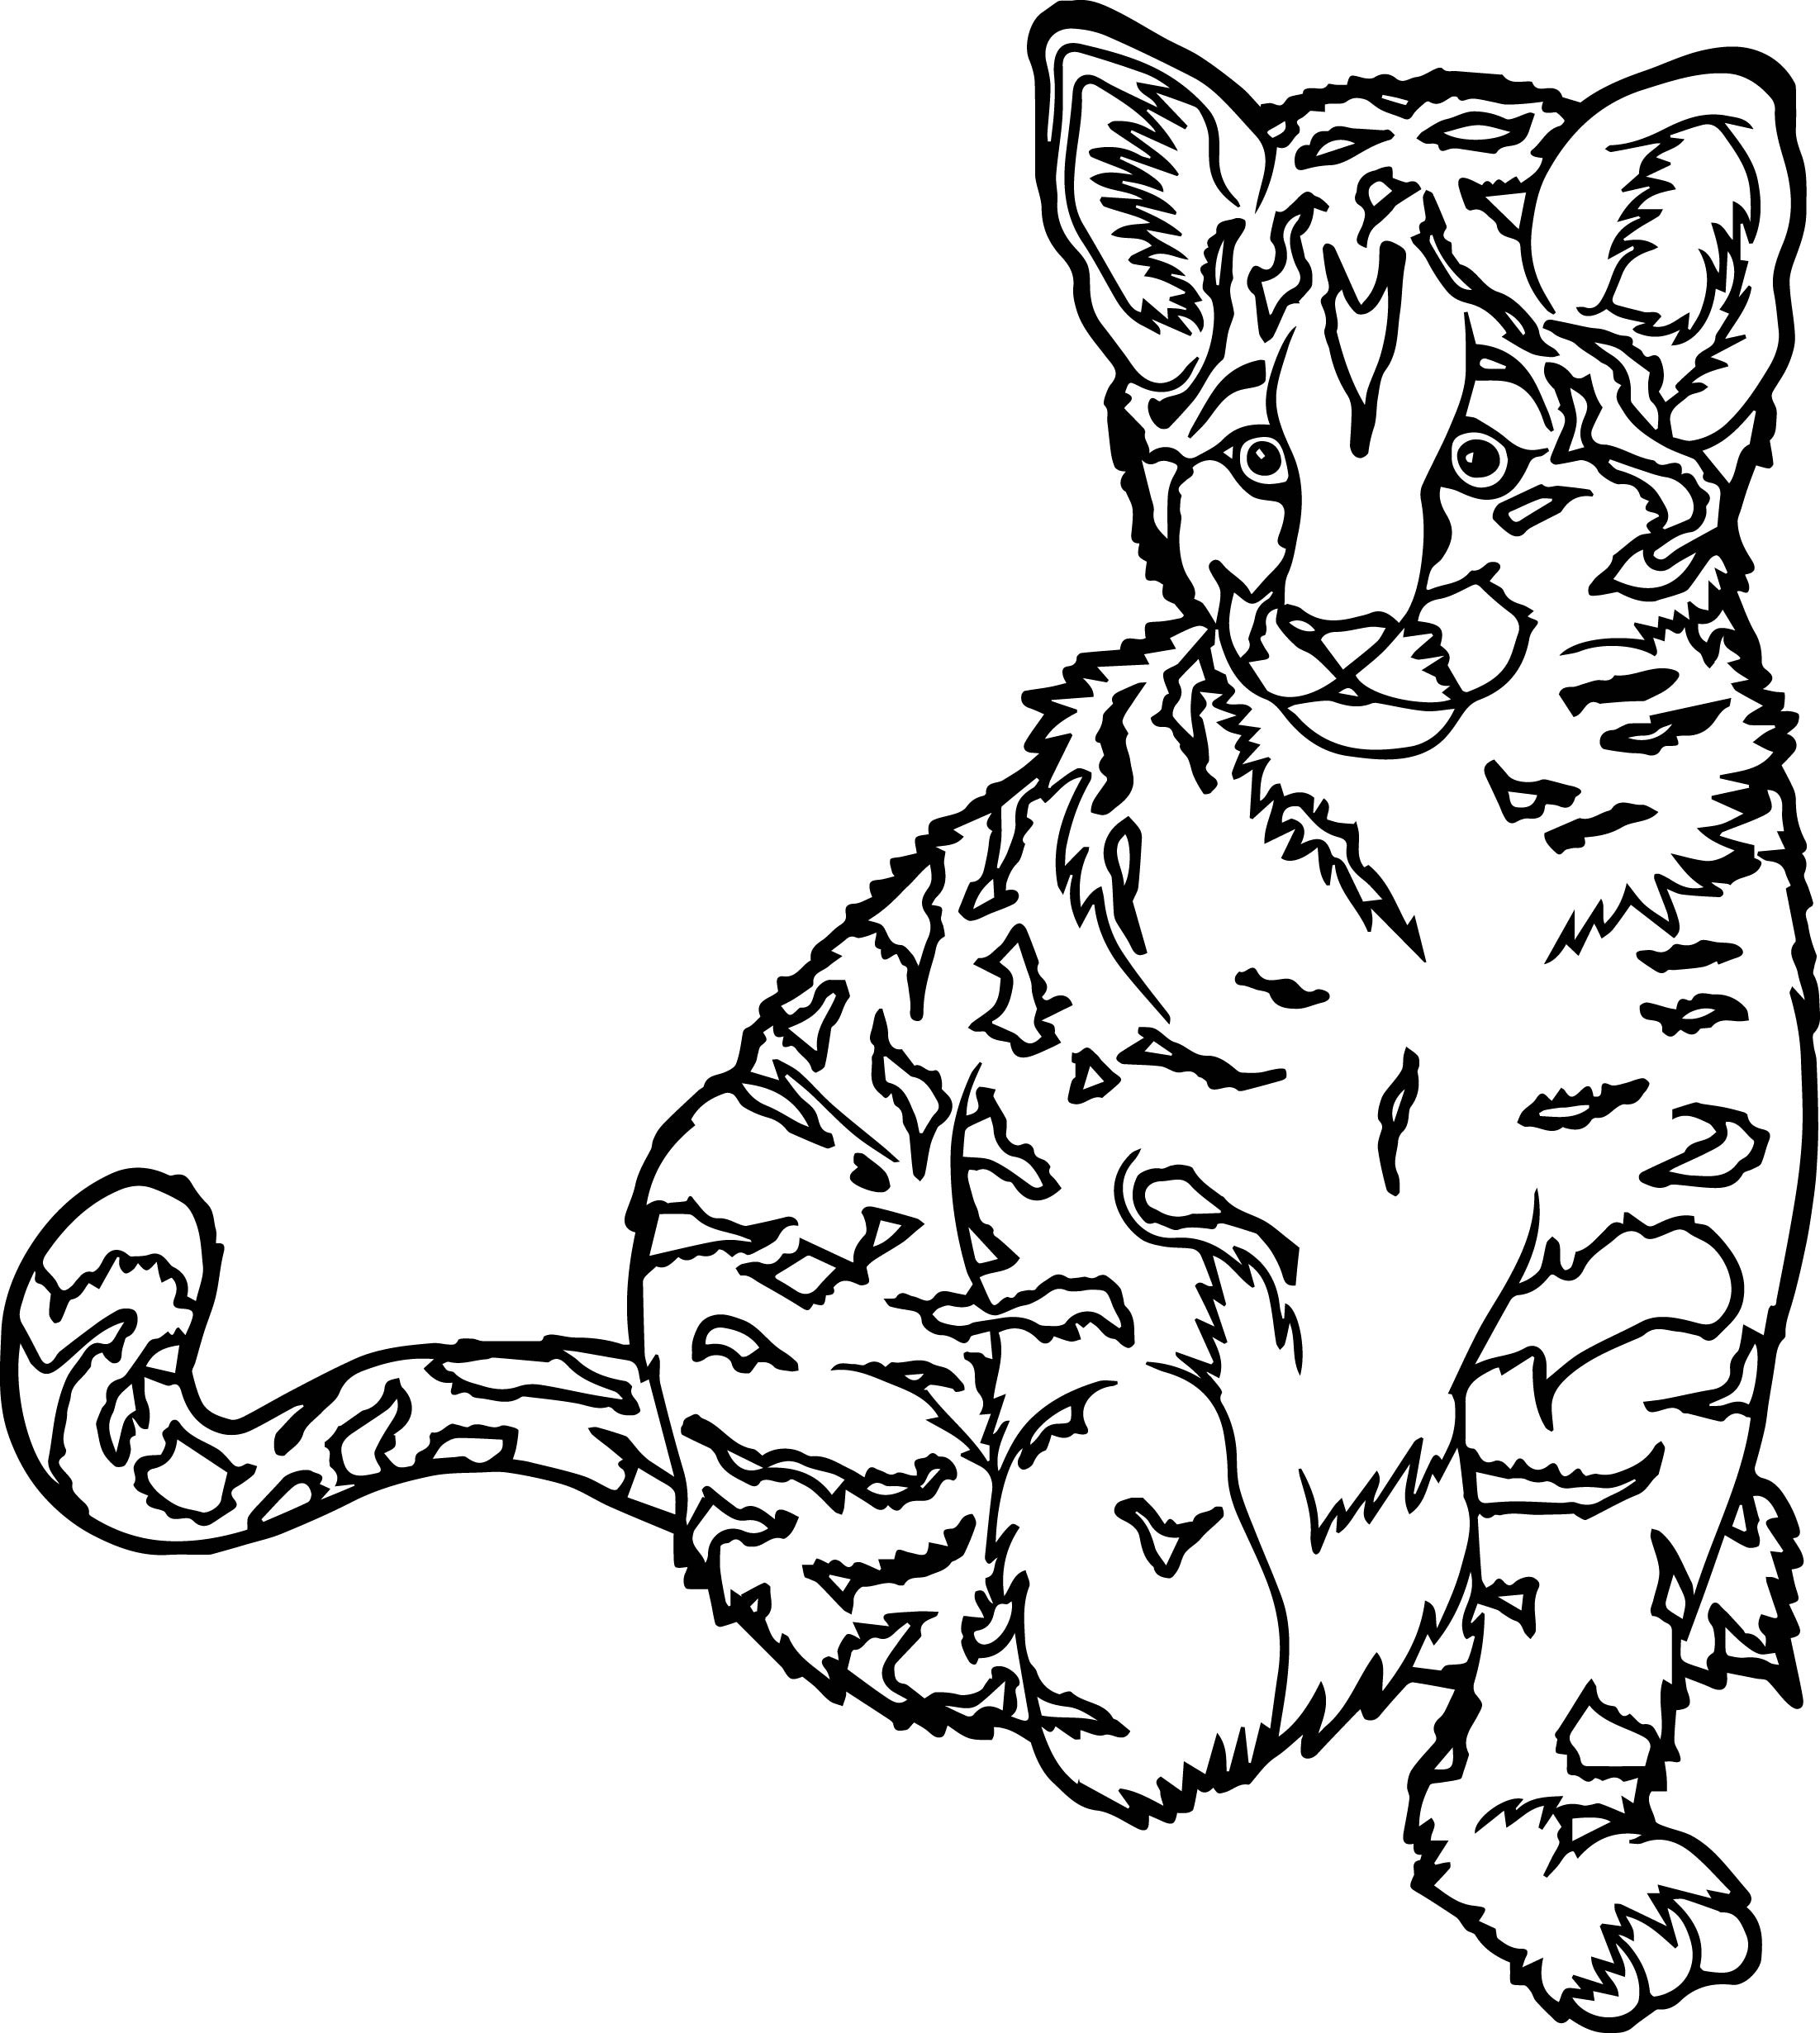 Cat coloring pages for adults can entertain young teens to adults for hours...